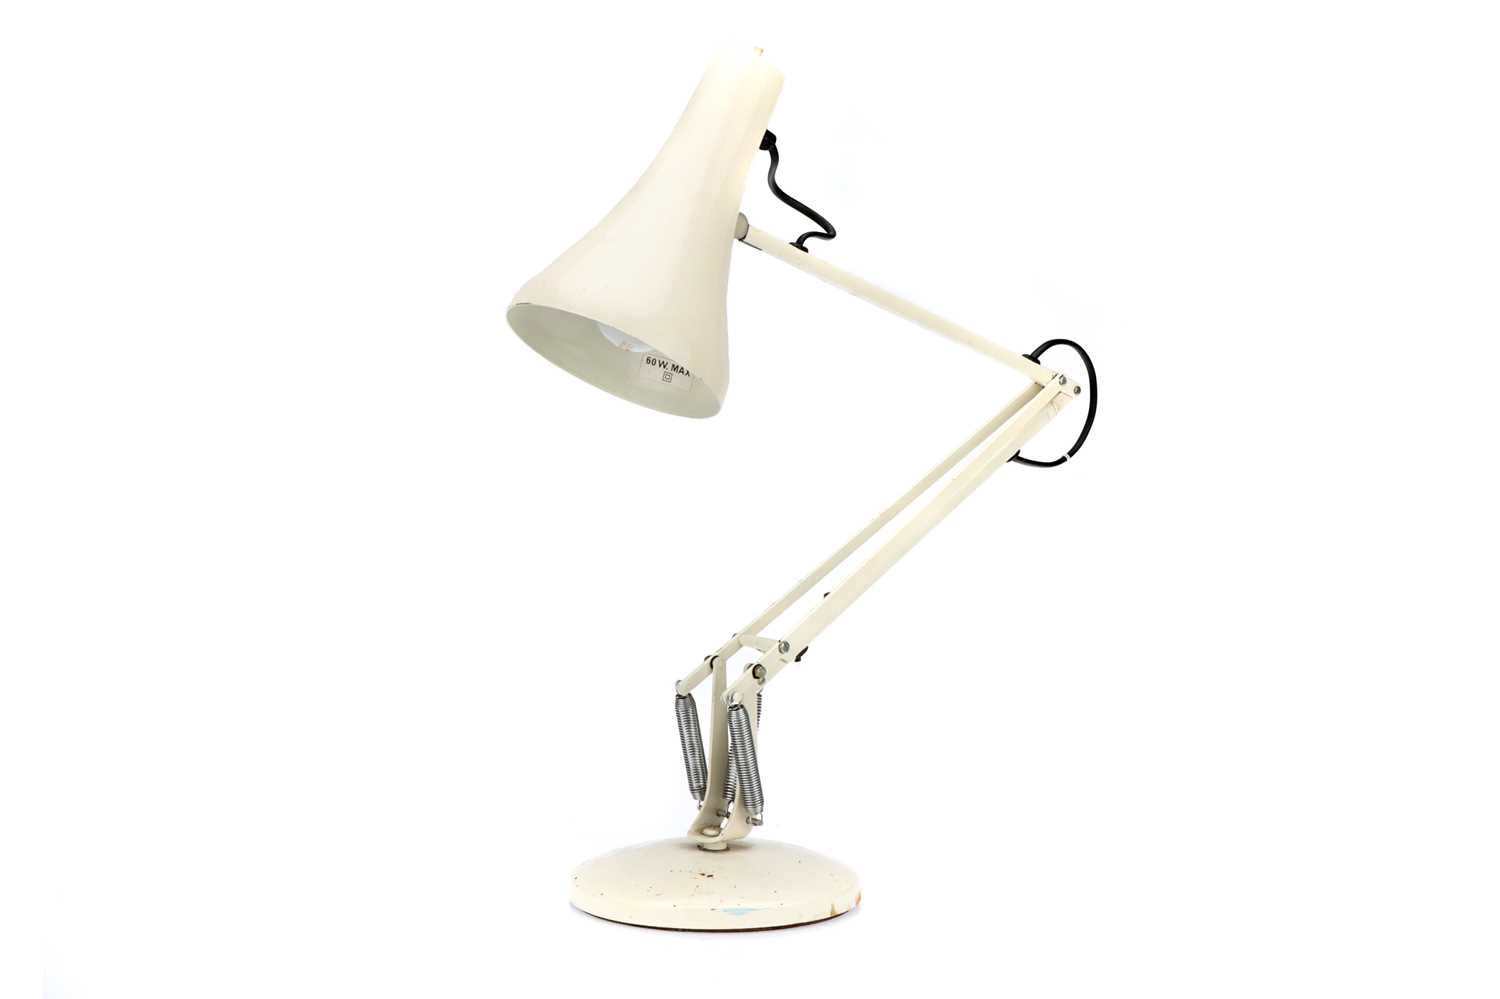 Lot 137 - A White Anglepoise Lamp